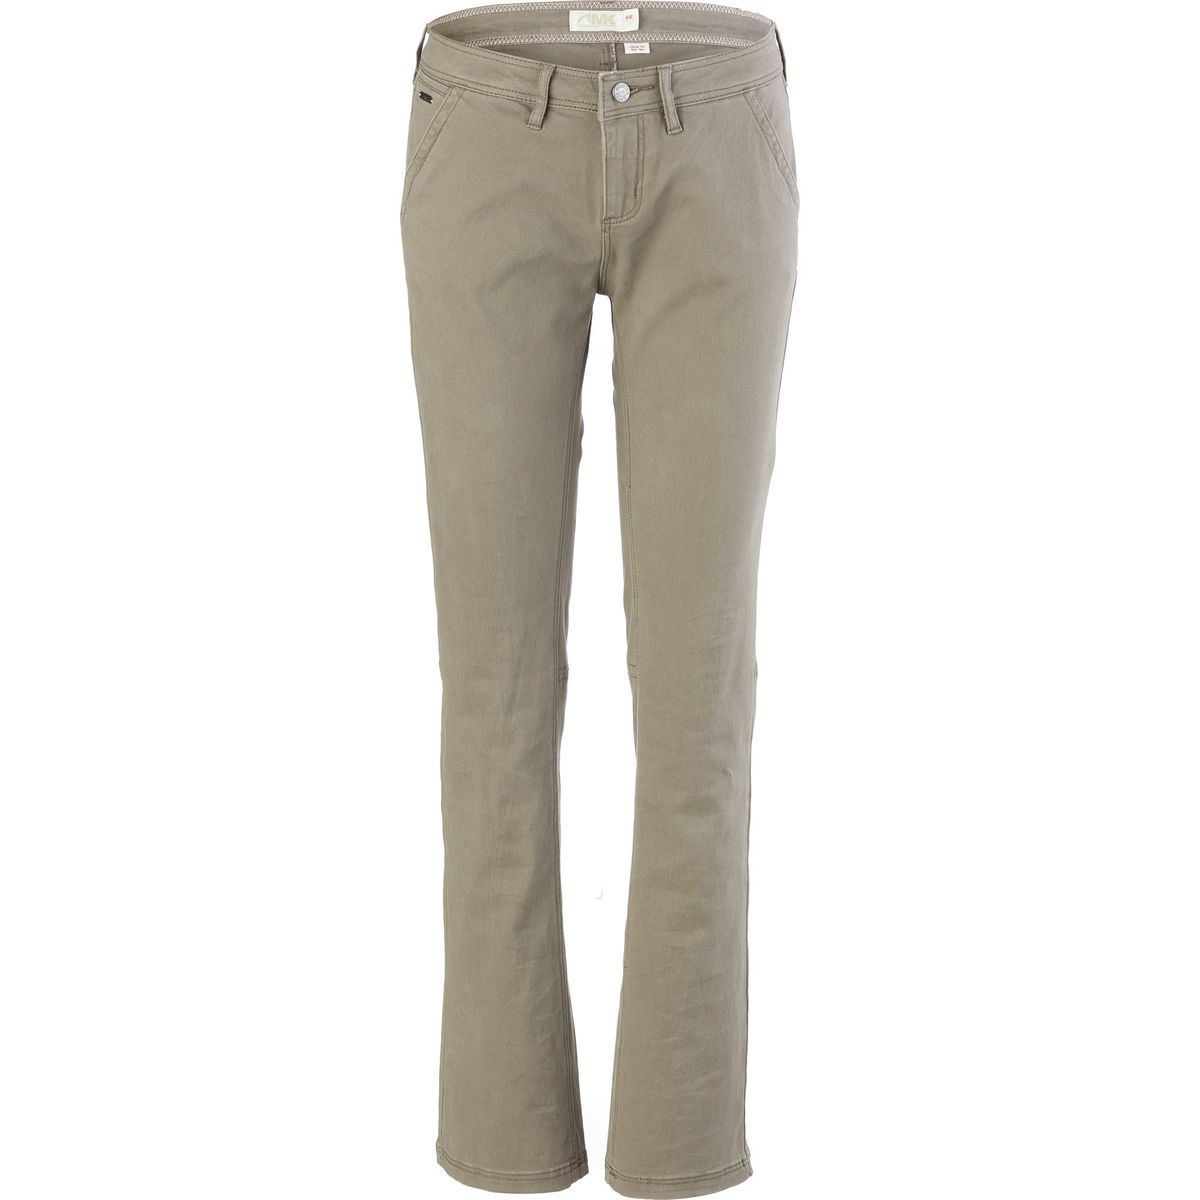 Mountain Khakis Camber 105 Classic Fit Jean - Women's - Clothing